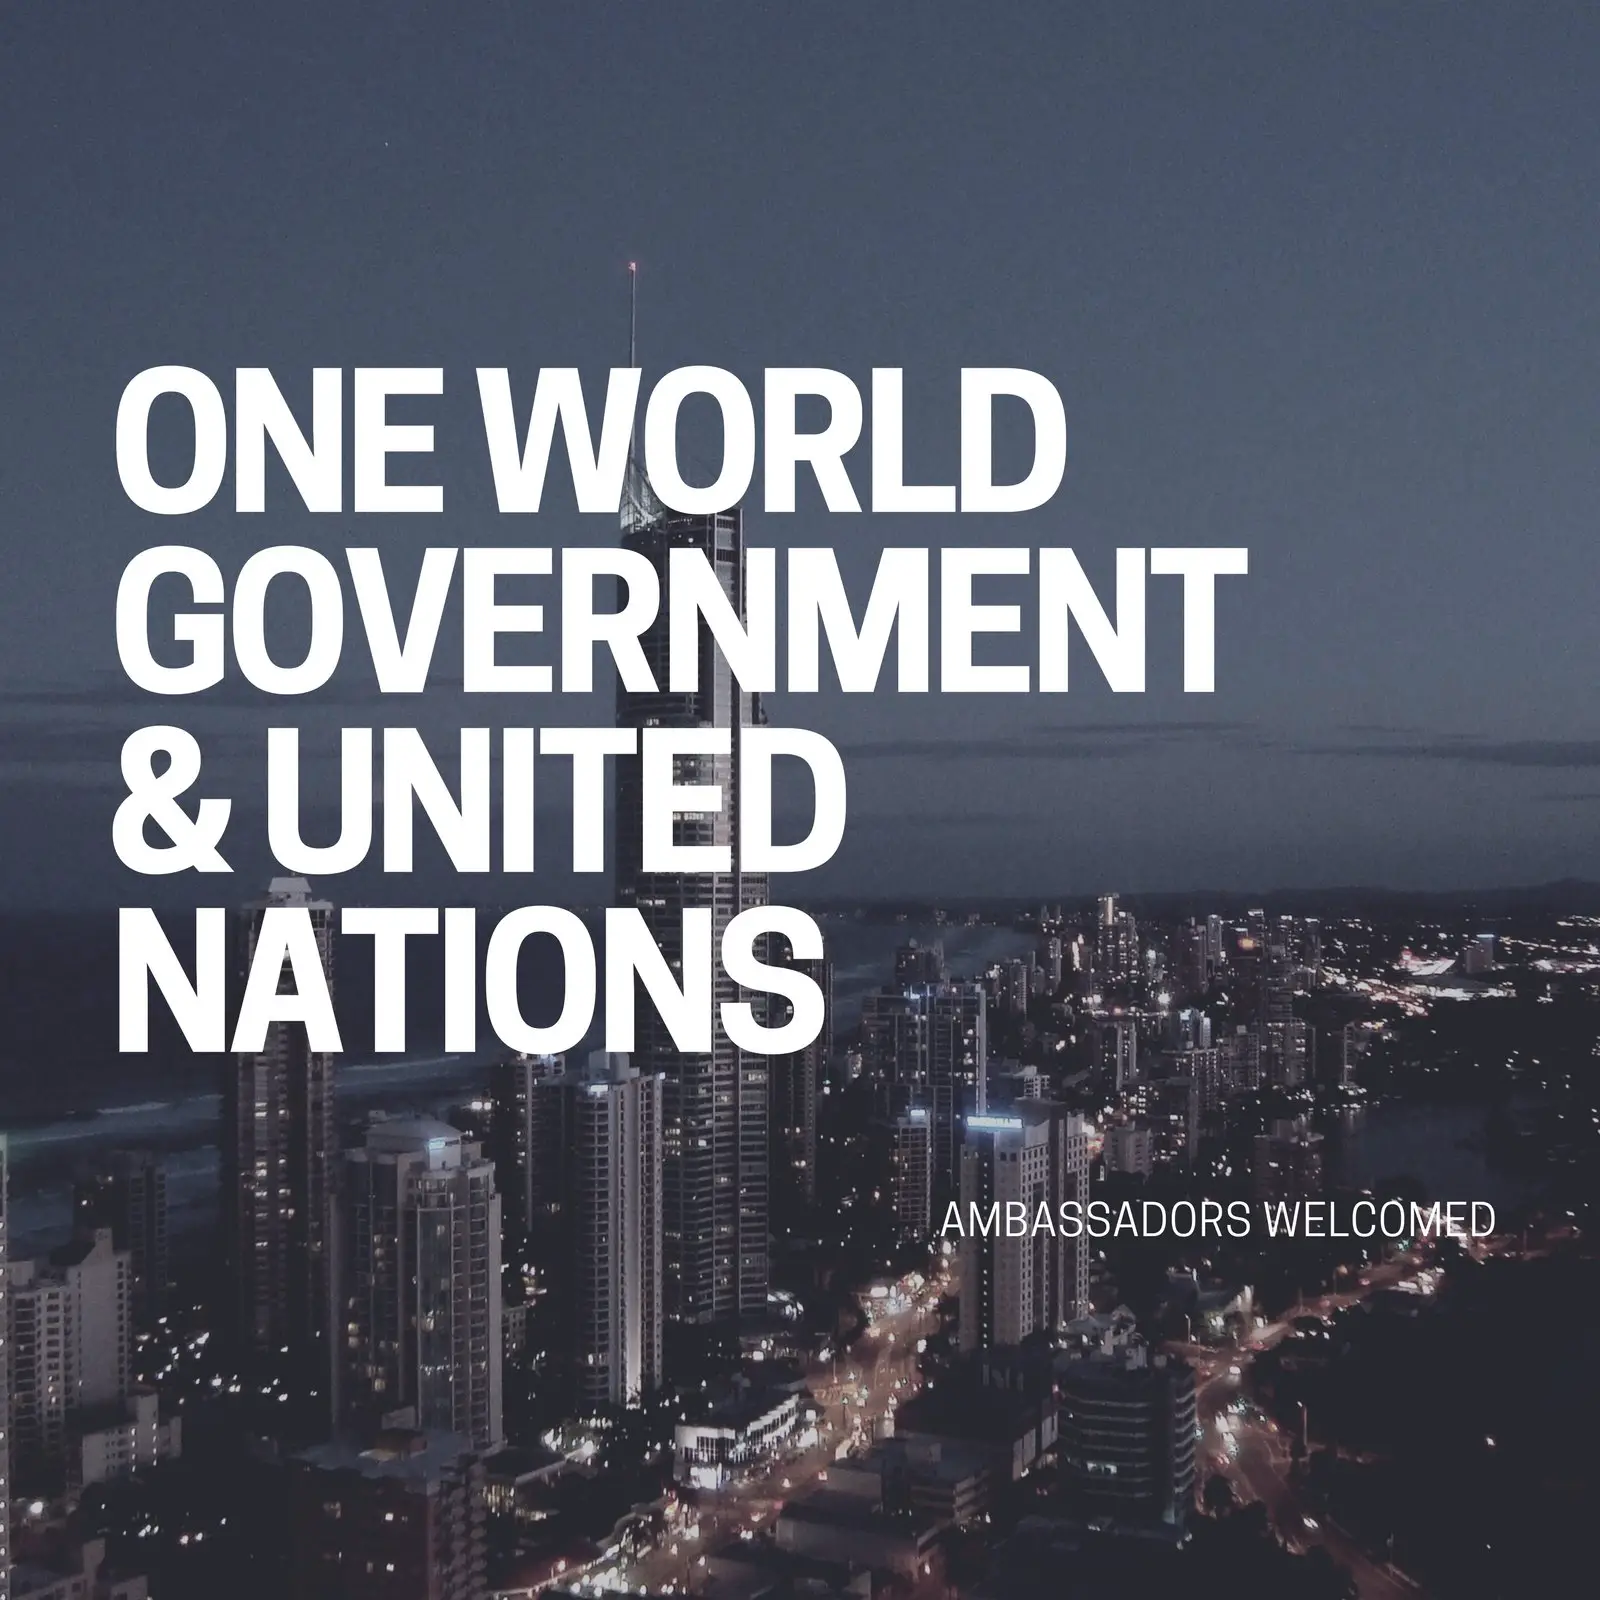 One World Government &  United Nations